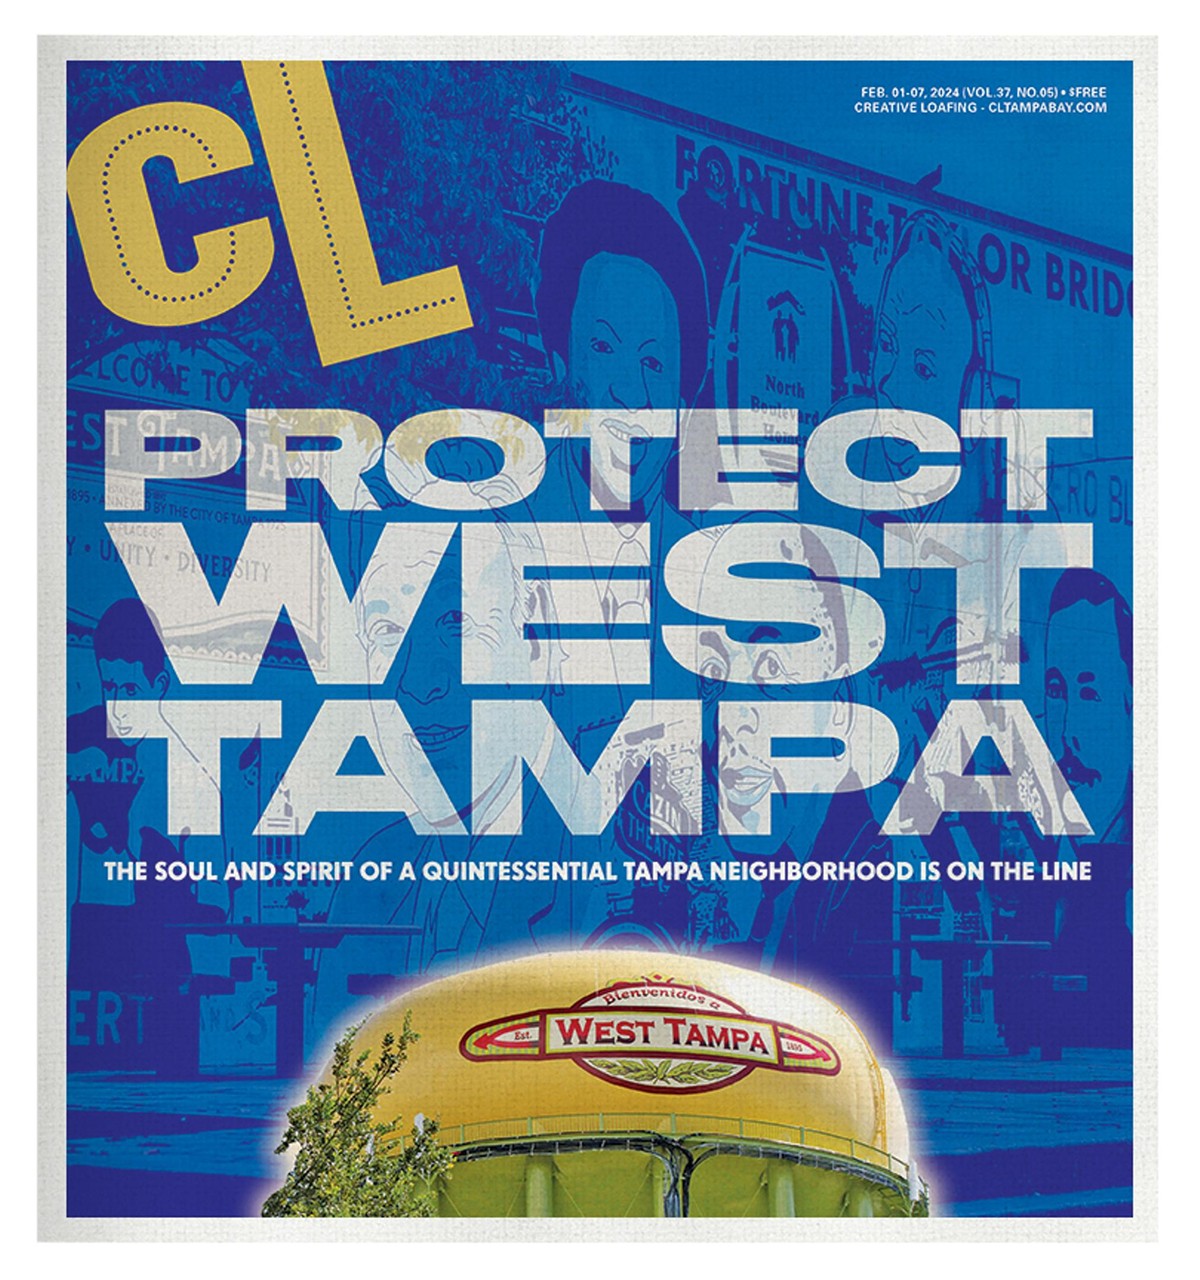 The Feb. 1, 2024 cover of Creative Loafing Tampa Bay.